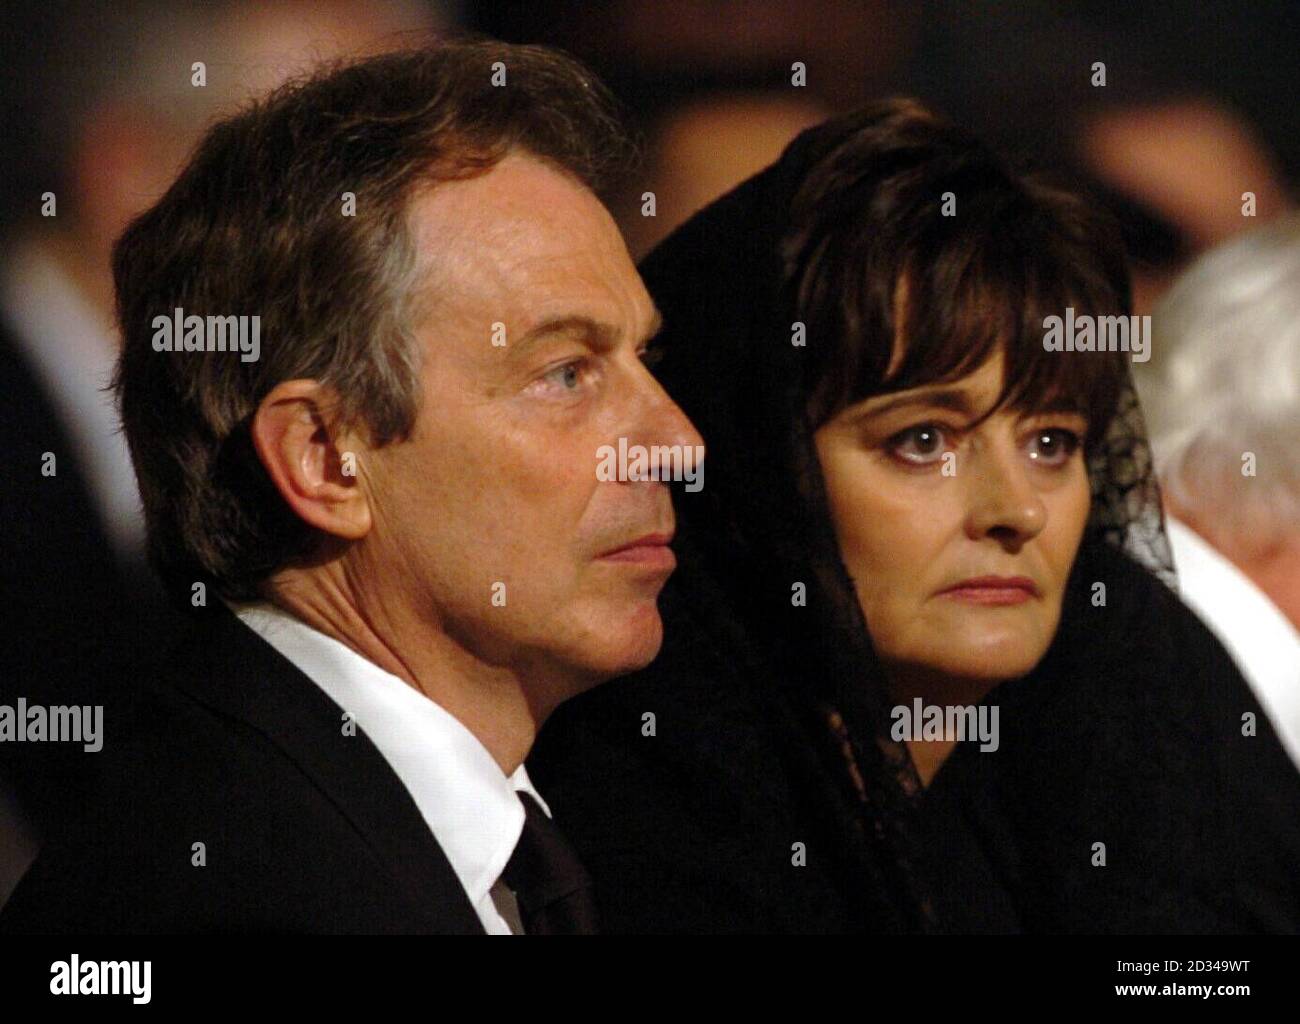 British Prime Minister Tony Blair and his wife Cherie, during the service of Vespers for the Dead in honour of Pope John Paul II. Stock Photo